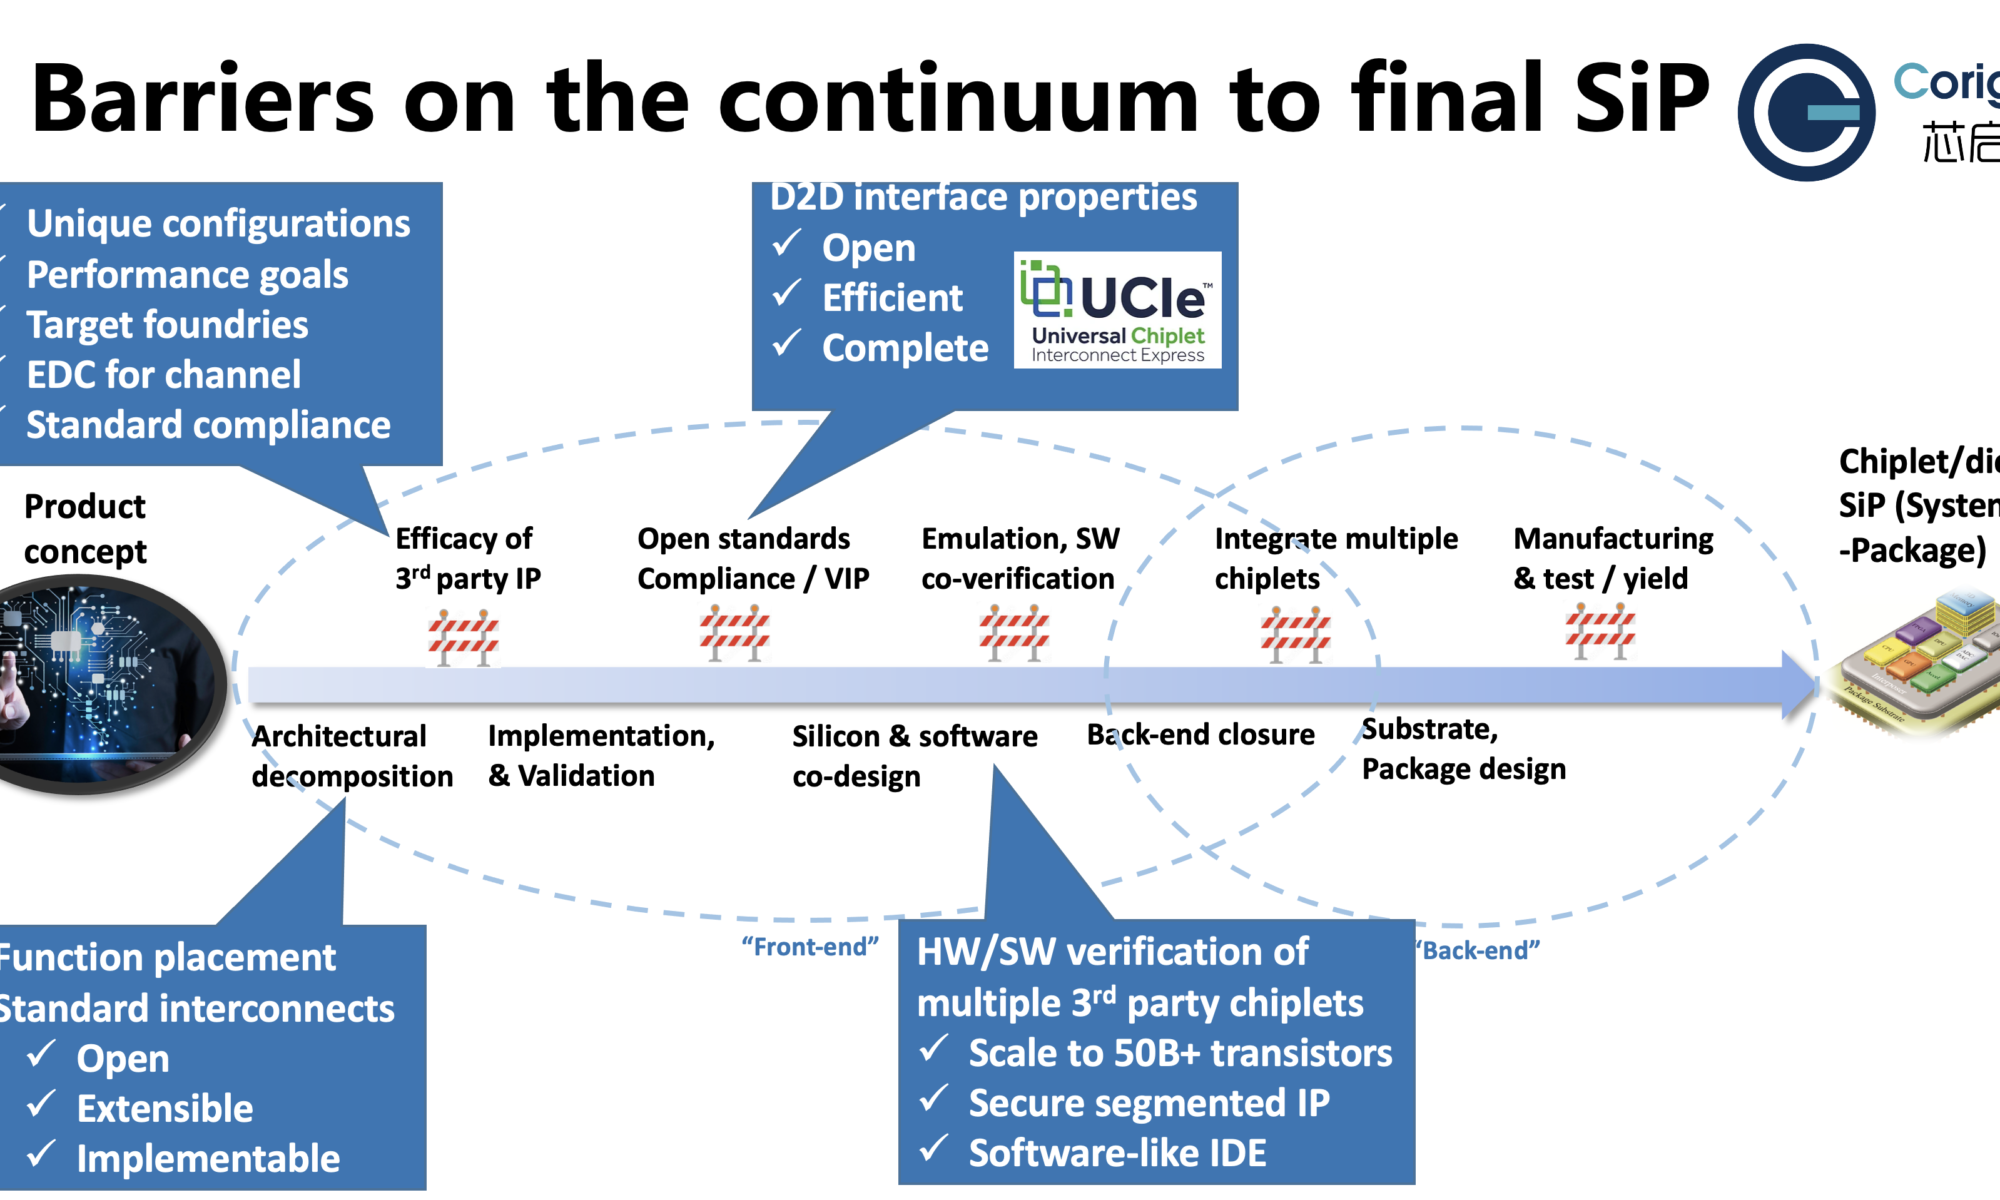 Barriers on the Continuum to SiP